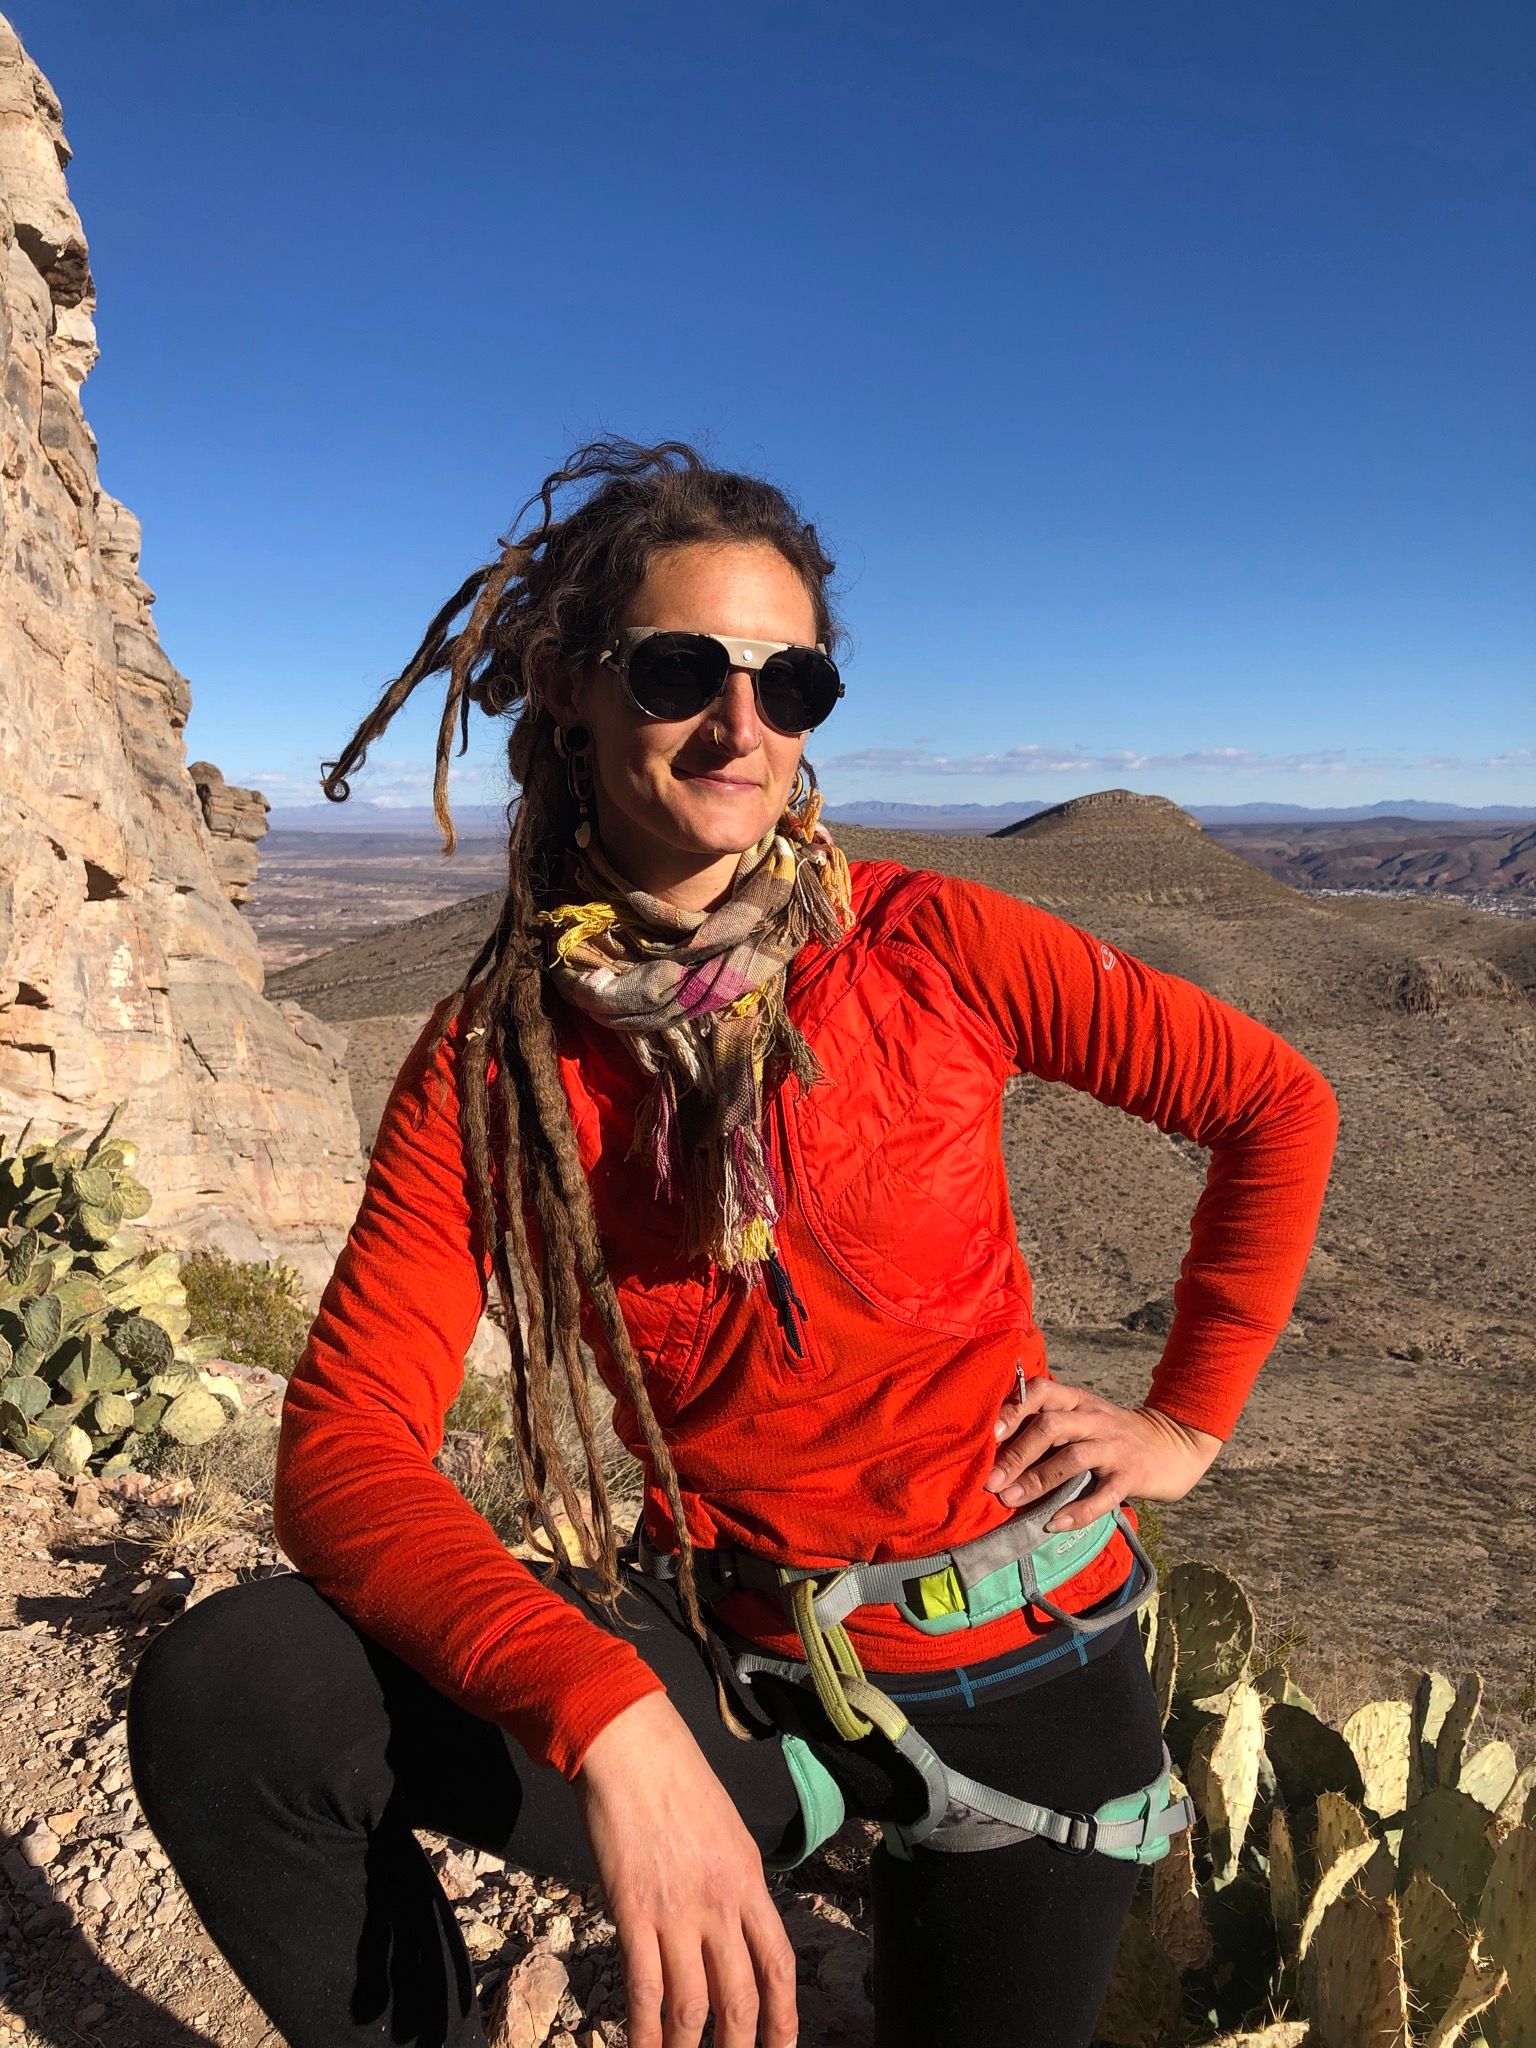 woman in orange shirt, multicolored scarf and sunglasses standing near cactus on a mountain in the desert